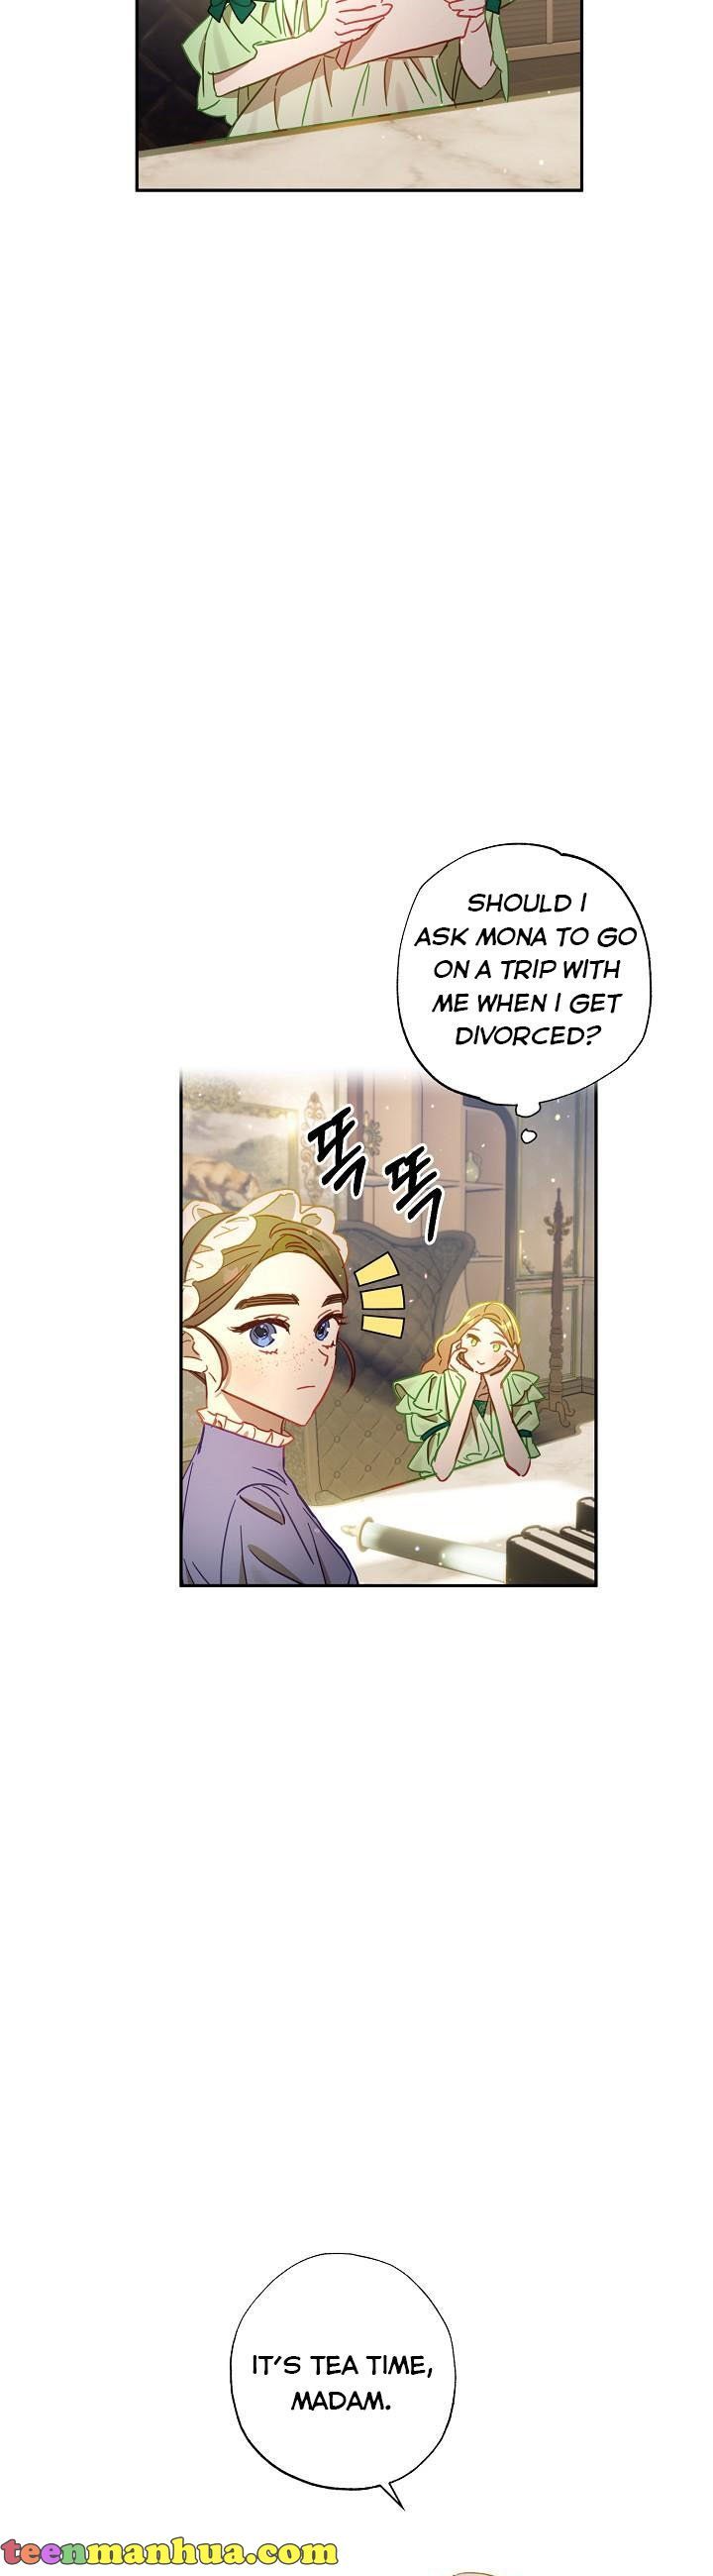 I am Afraid I have Failed to Divorce Chapter 39 page 21